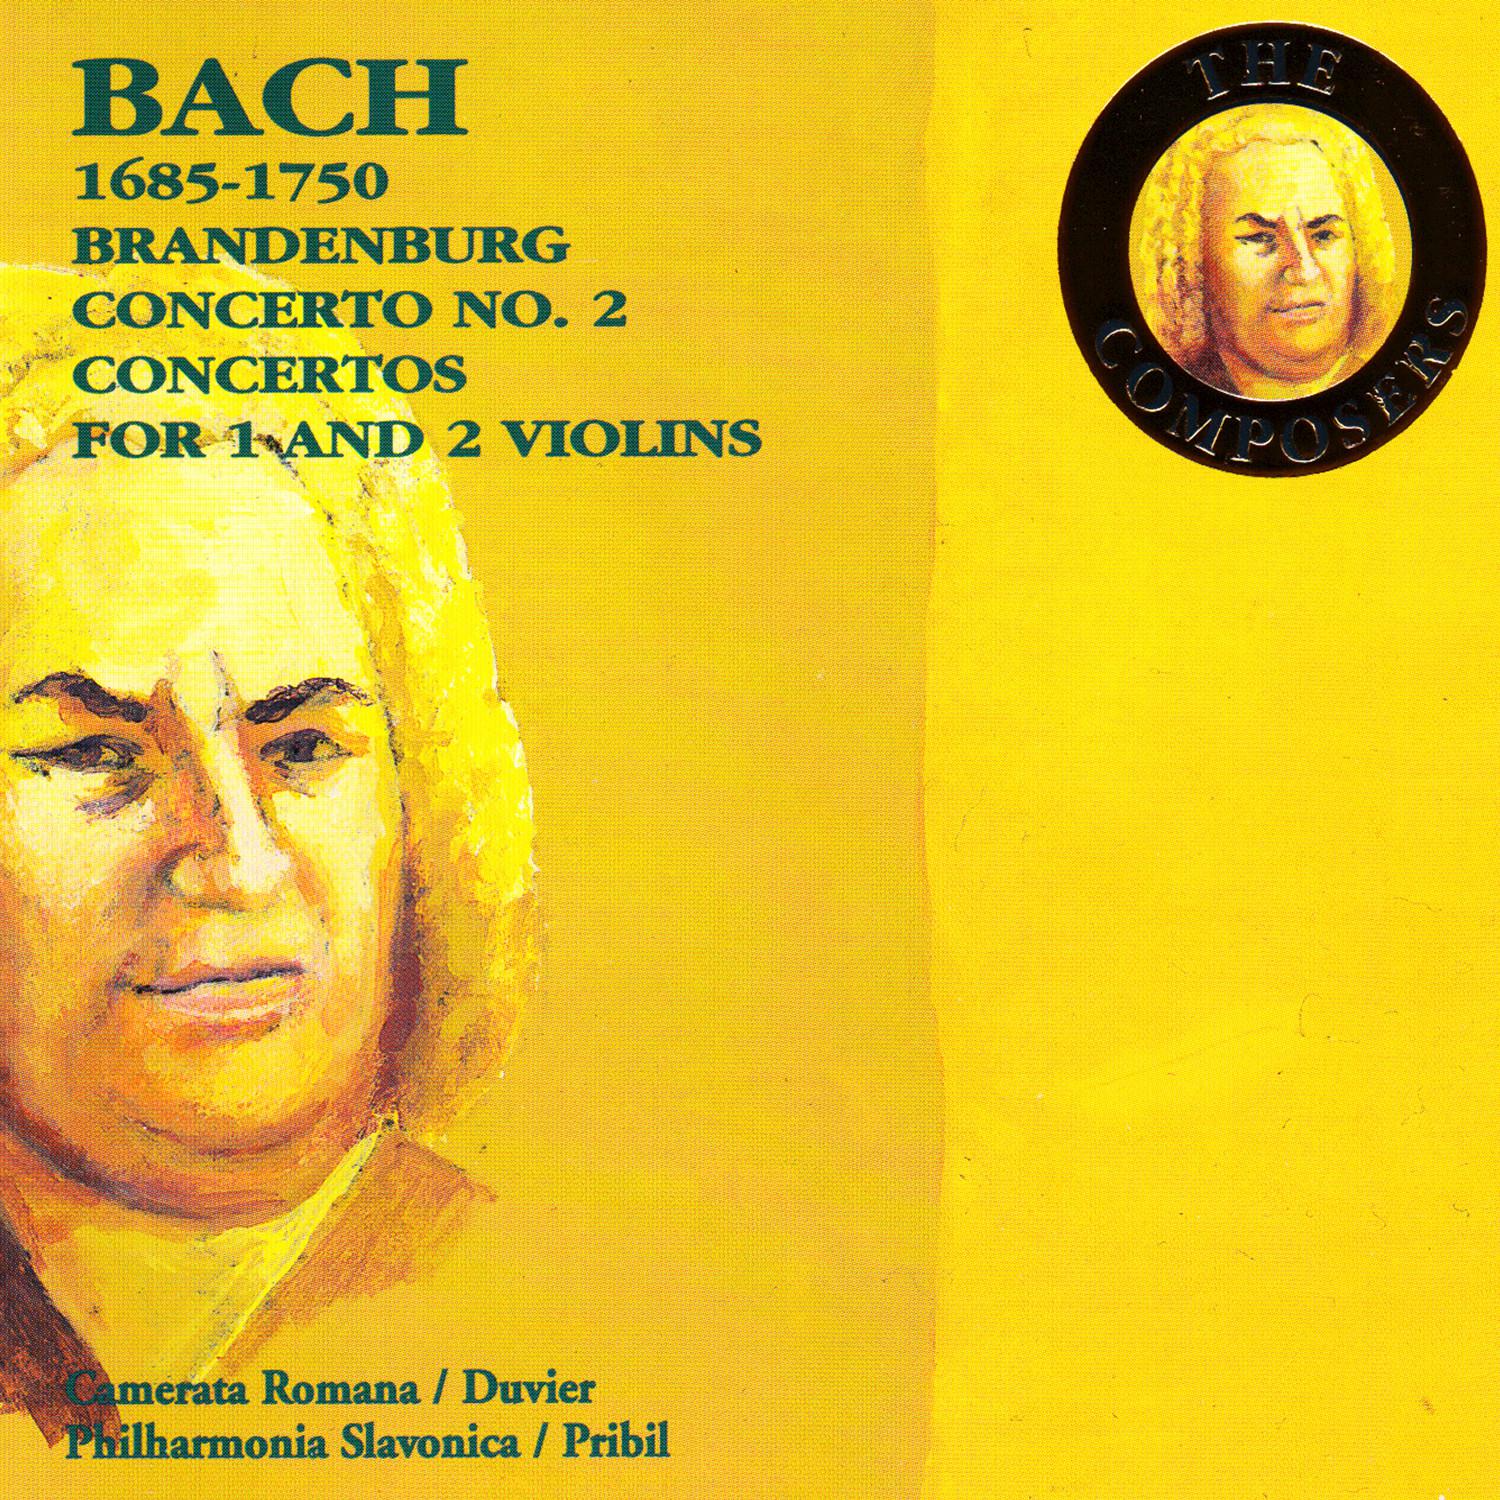 Concerto for Violin, Strings and Basso, BWV 1041: Andante